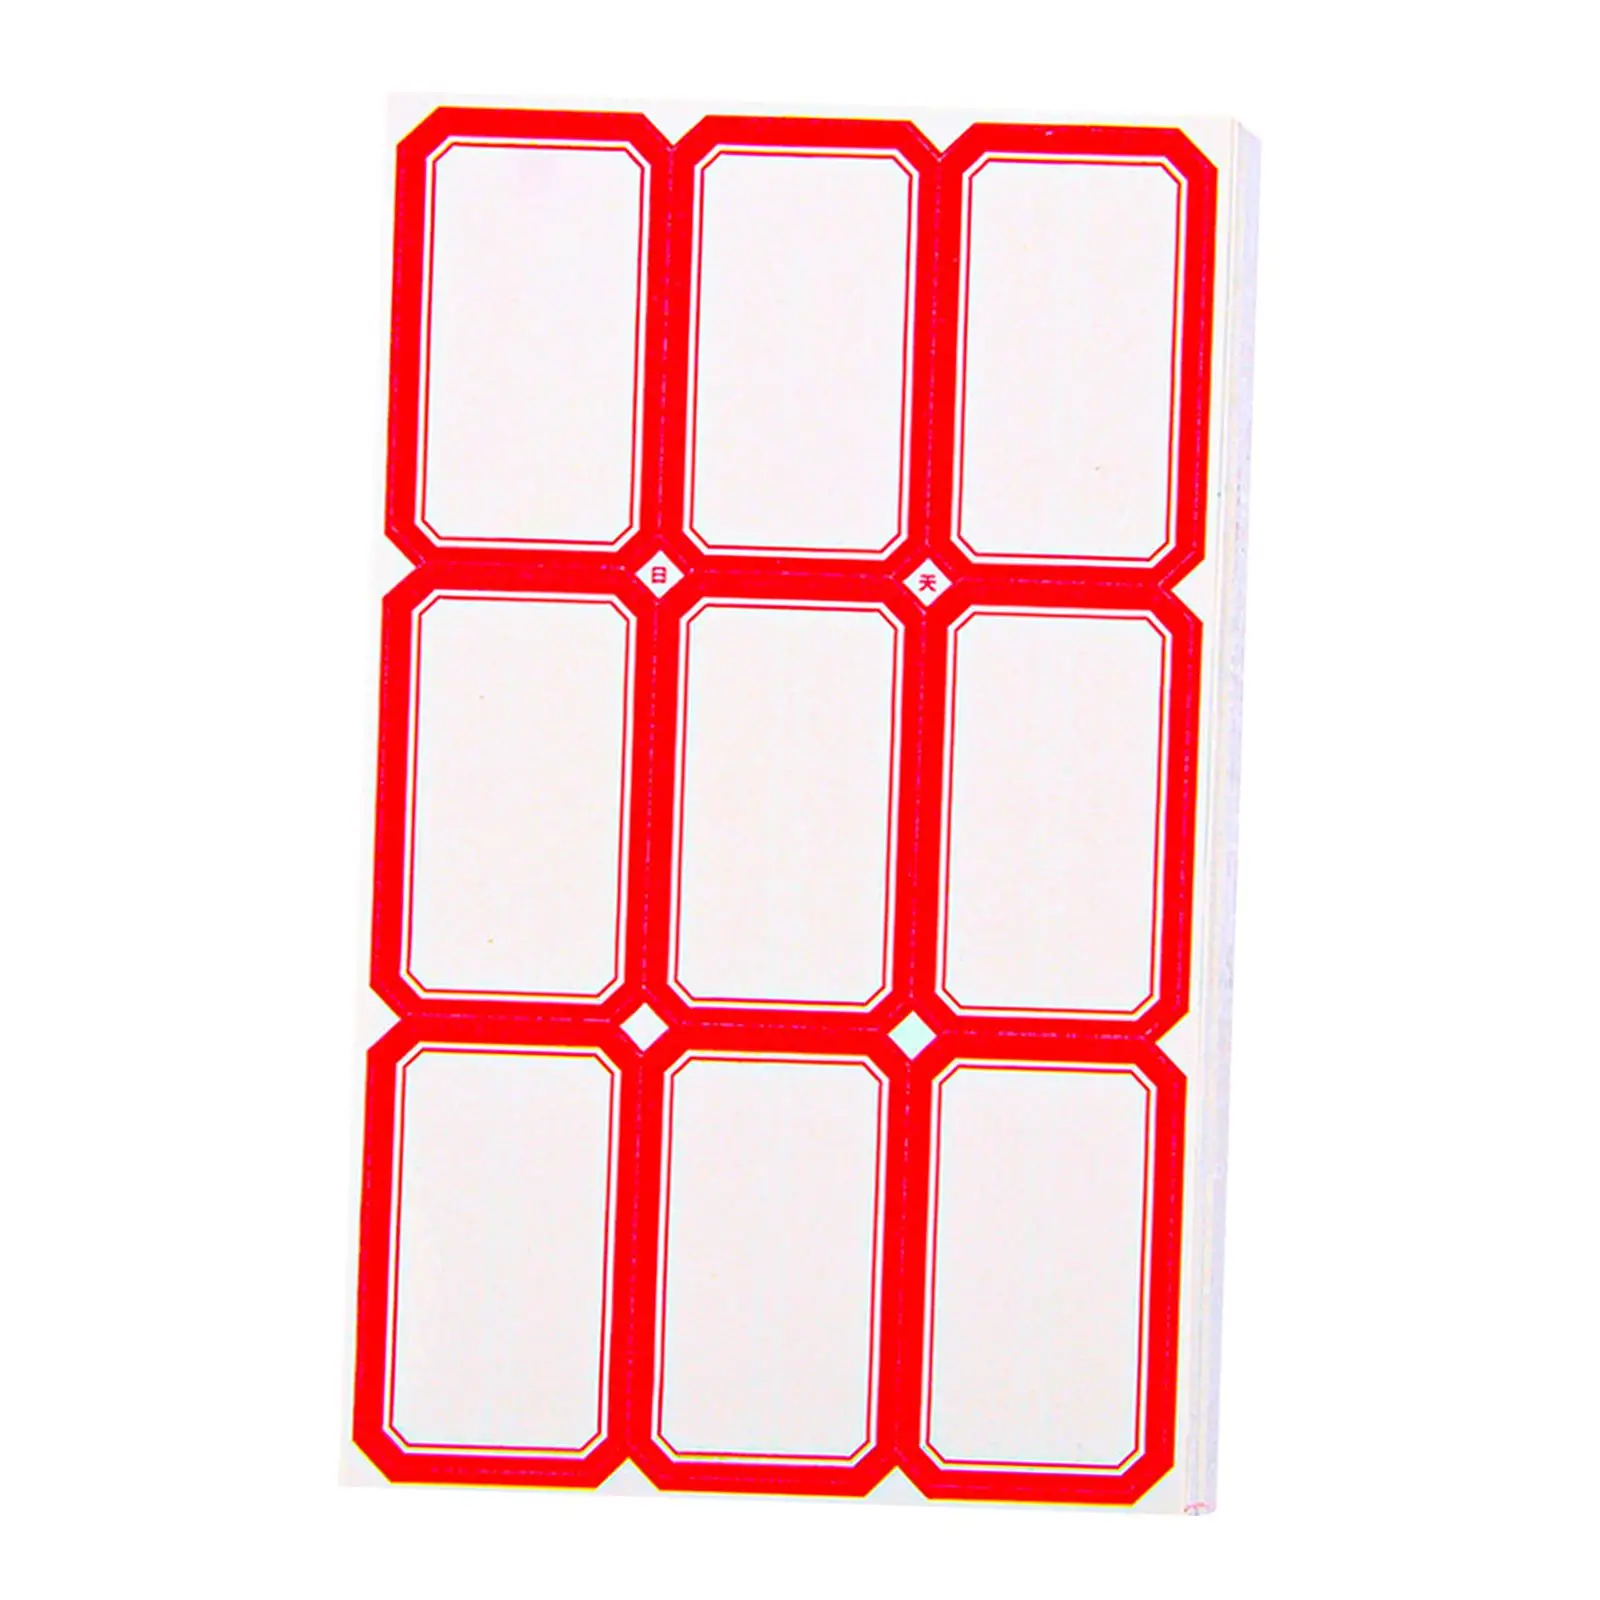 50 Sheets Name Tag Labels with Adhesive Directory Indexes Writable Name Tag Stickers for Jars Office Home Kindergarten Classroom